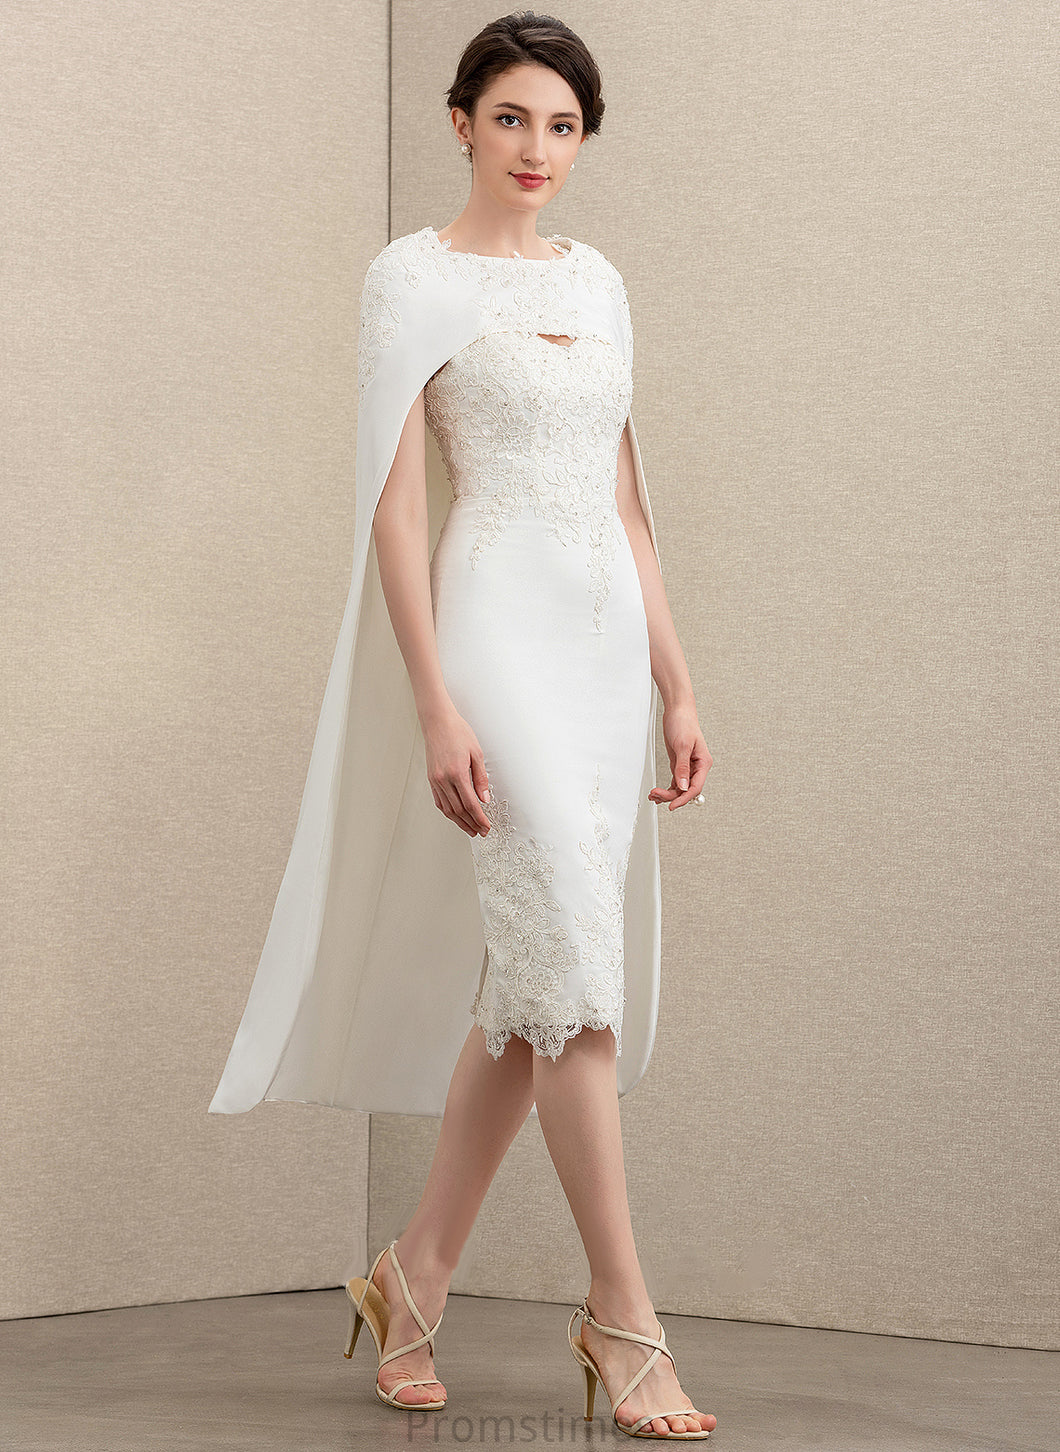 Dress Mother Mother of the Bride Dresses With Stretch Sweetheart Knee-Length of Ali Lace Crepe Sheath/Column the Beading Bride